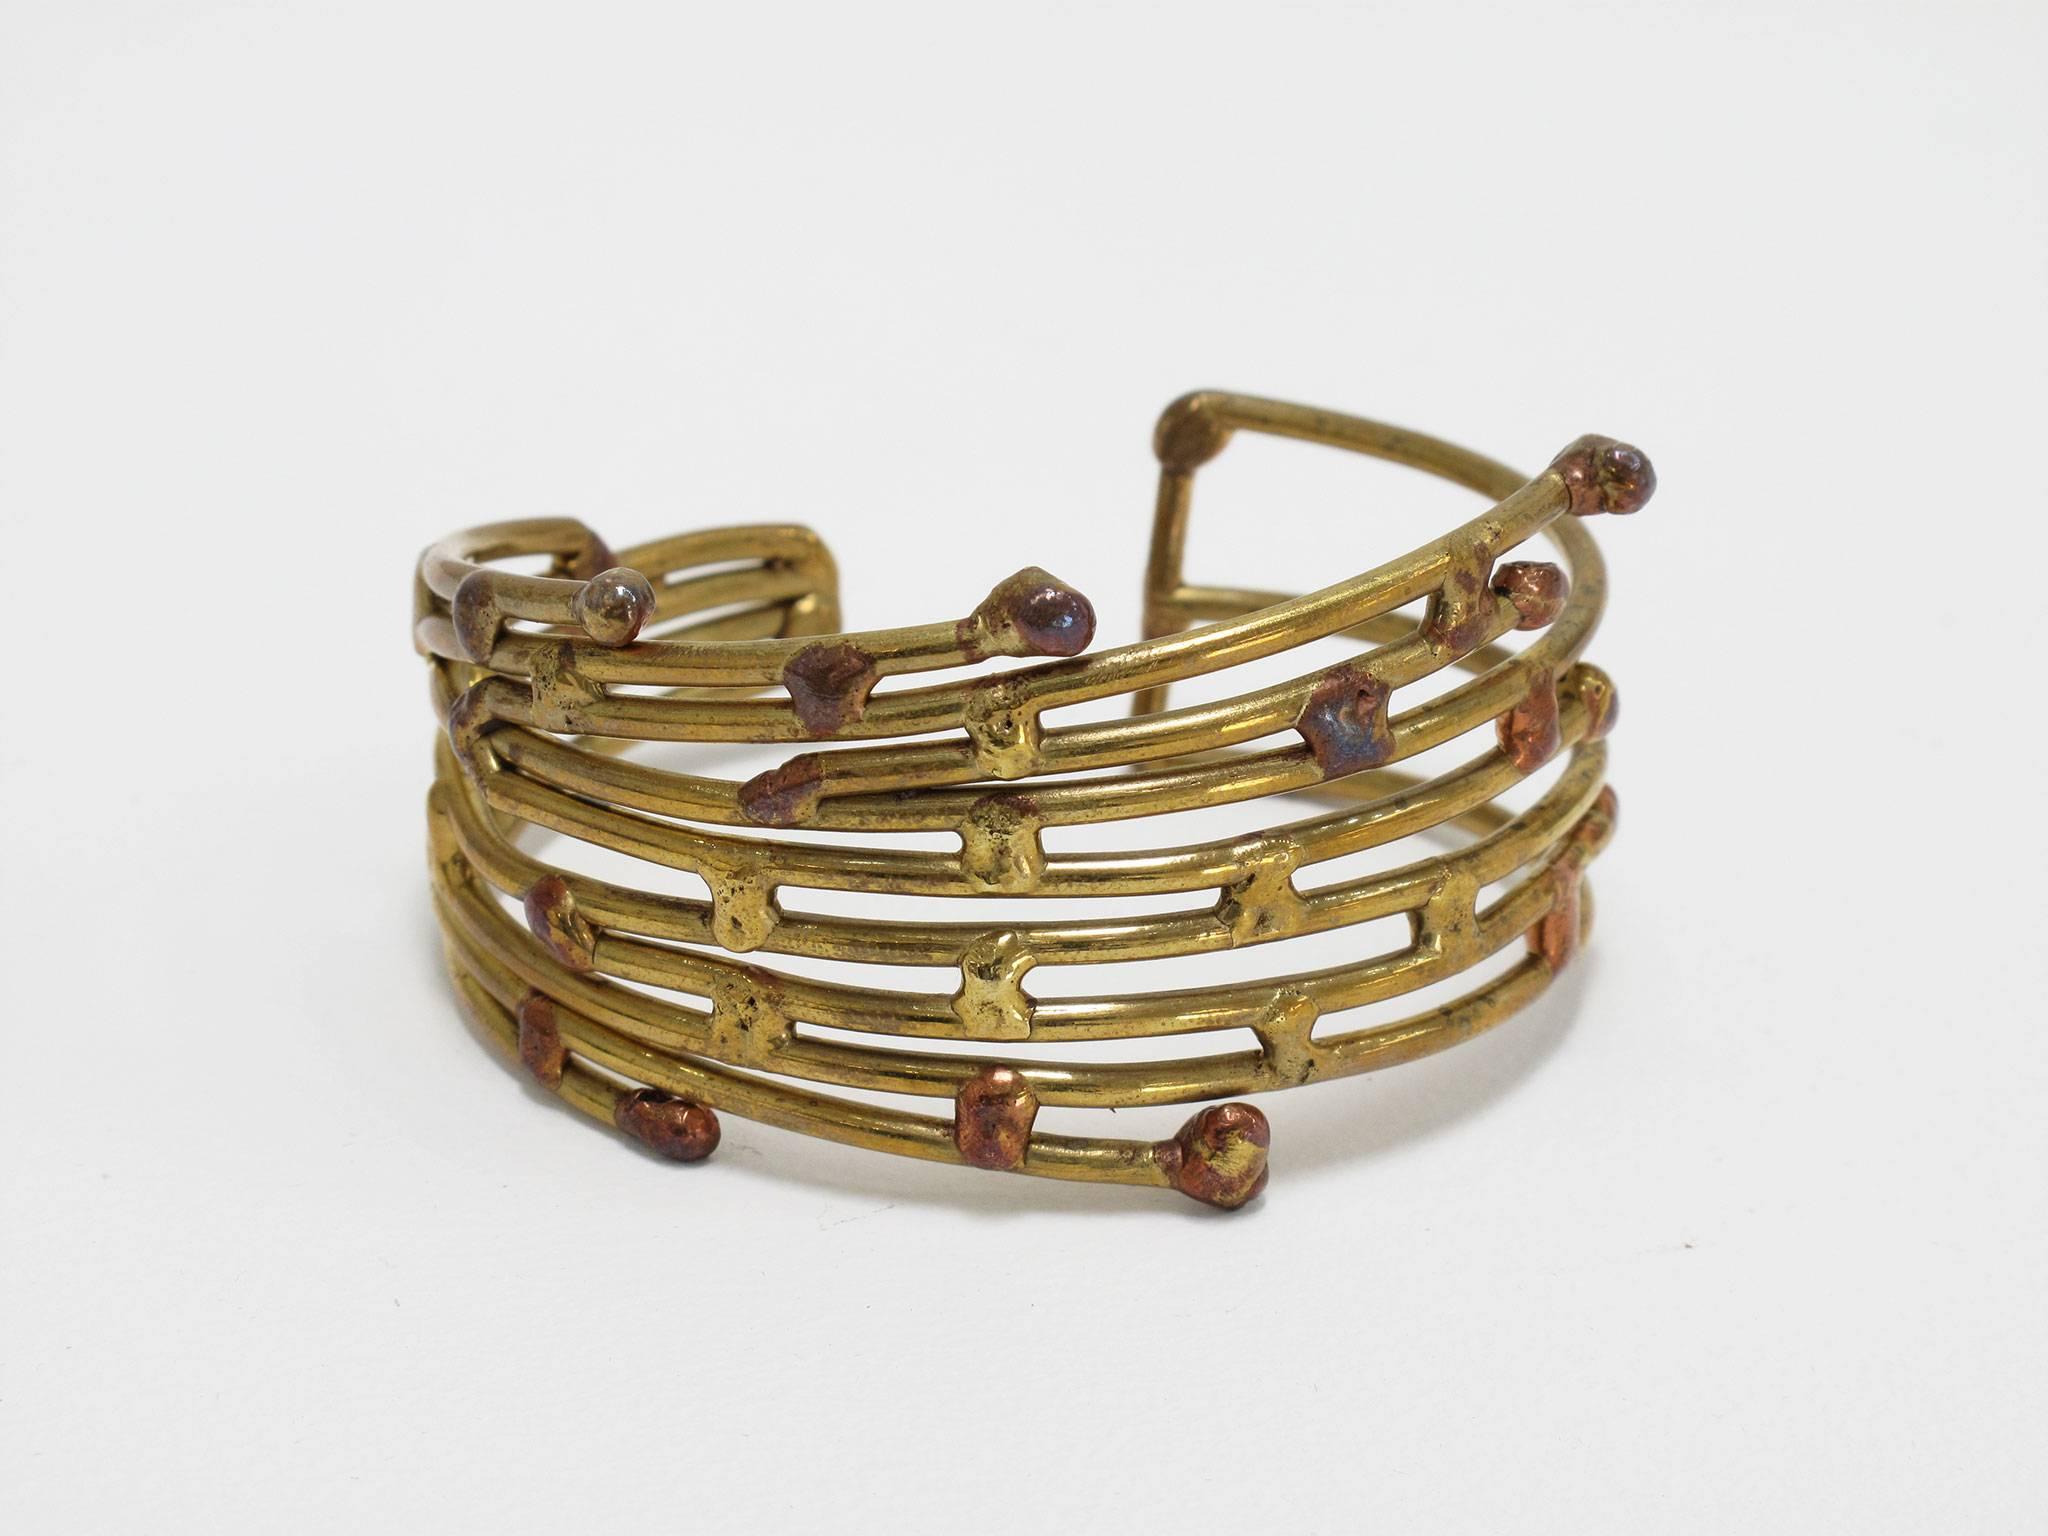 This antique piece of jewelry, hand-sculpted in brass and accented by drops of copper, Modernist in style and Brutalist in technique, fits comfortably on a smaller wrist and arm, 1 1/4 high x 3 wide x 2 1/4 deep inches.